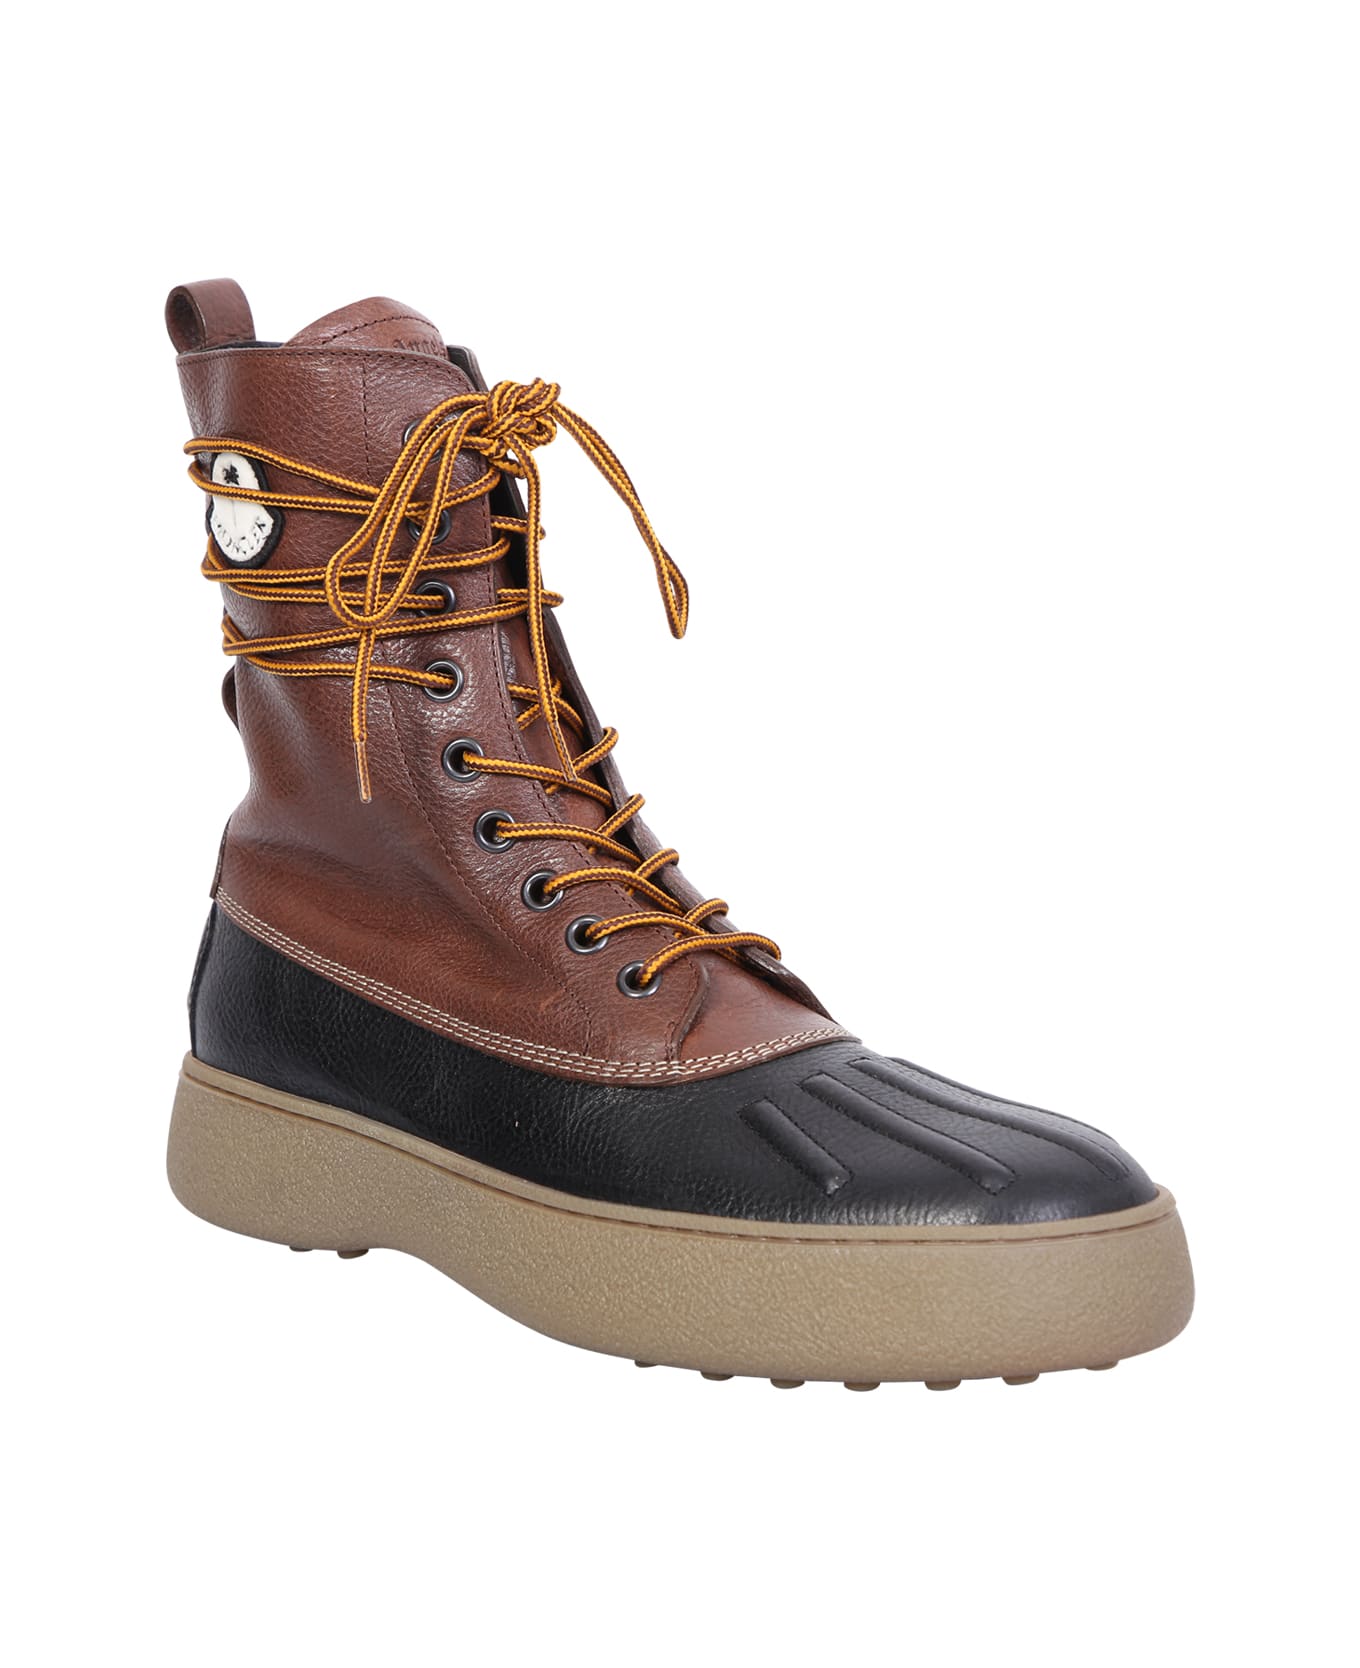 Moncler Genius Winter Gommino Leather Boots - Brown ブーツ